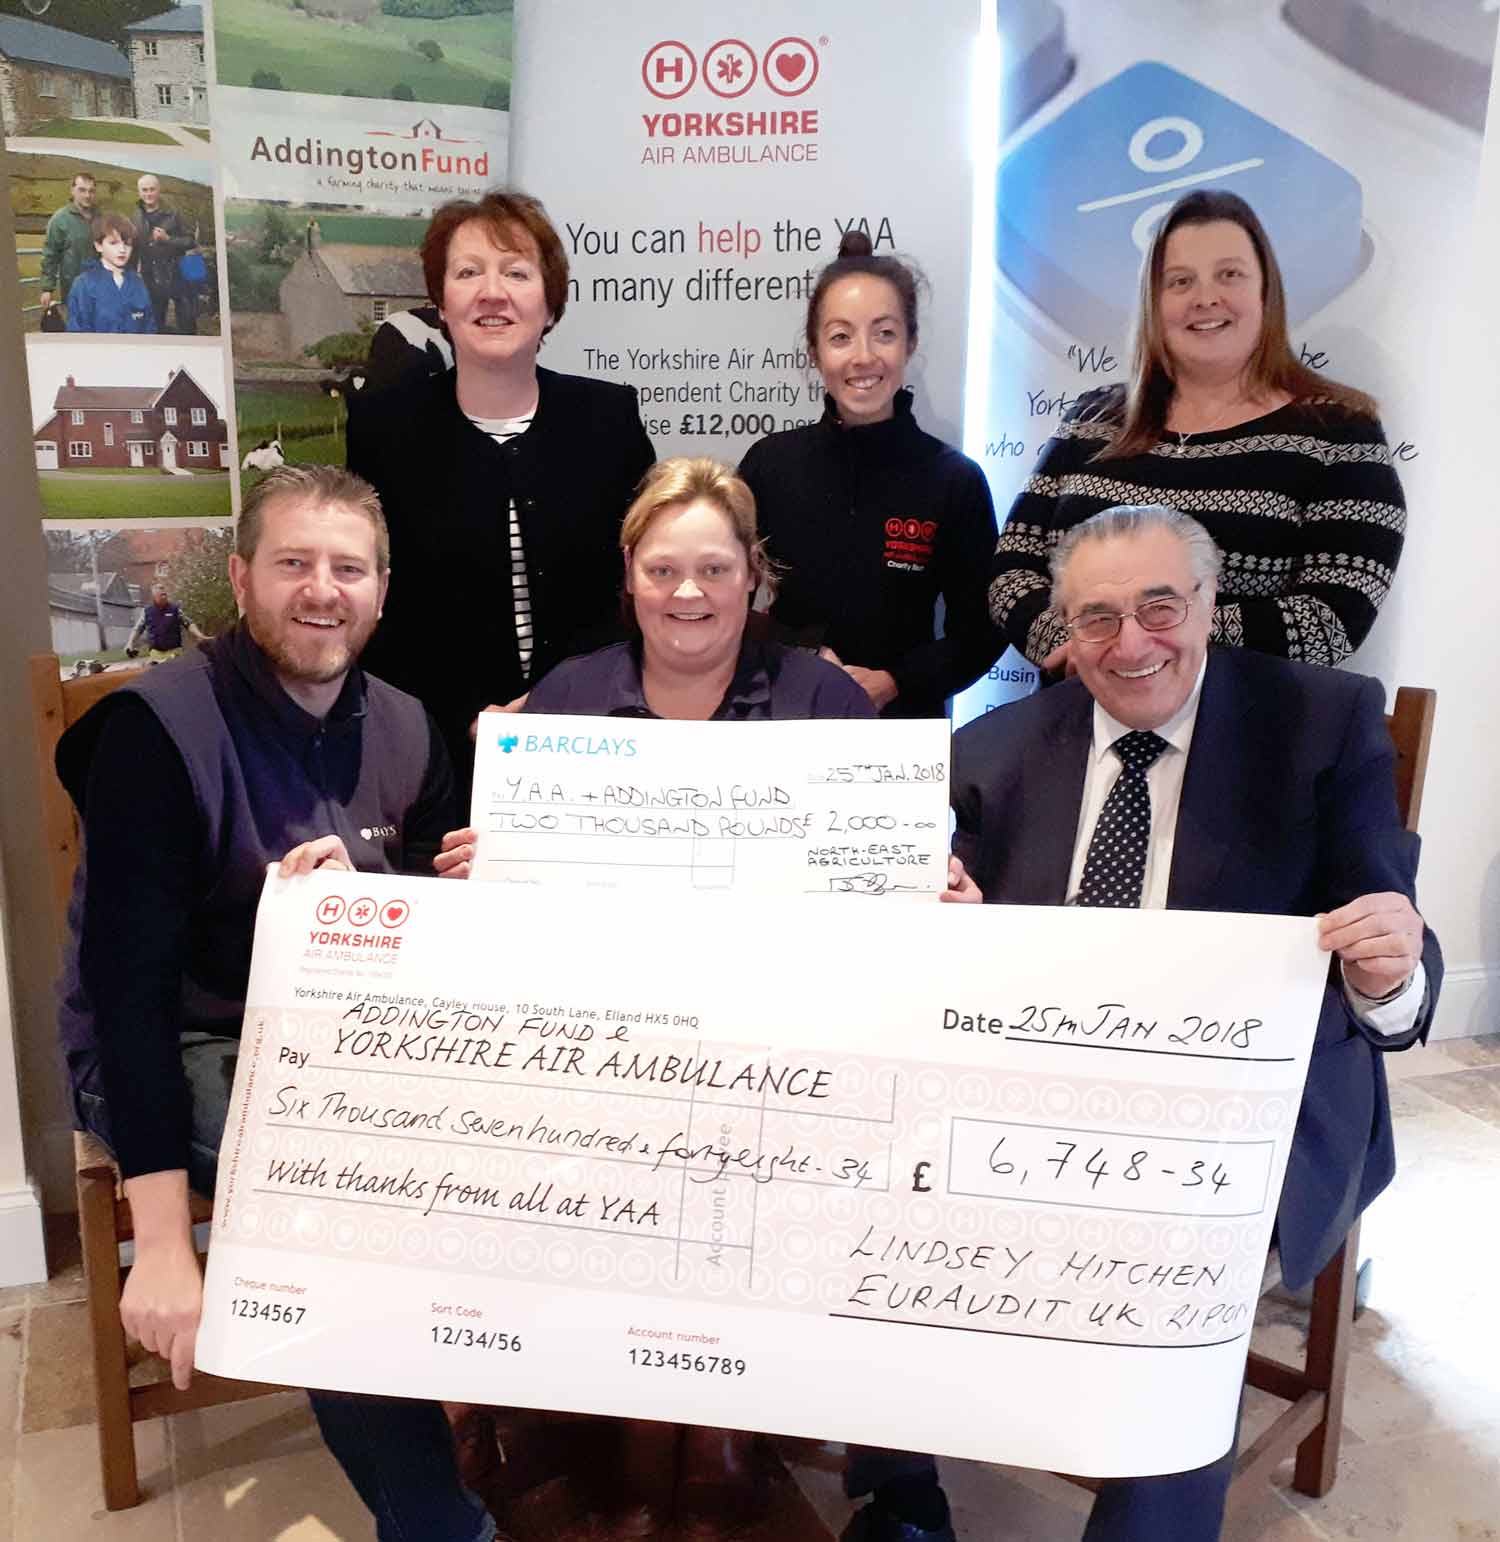 Pictured at the 2018 Yorkshire Farmhouse Big Breakfast cheque presentation – the final proceeds were considerably higher - are, back row from left, Christine Ryder, of Scaife Hall Farm B&B, Blubberhouses, also a trustee of the Addington Fund, Olivia Mulligan, the Yorkshire Air Ambulance’s North Yorkshire Community Fundraiser, and Farm Stay UK member Tanya Umpleby, of Spruisty Hall Farm, Killinghall. Seated, from left, are Ian Robson, Barclays’ regional agricultural manager, Big Breakfast host Lindsey Kitchen, and Eura Adit’s Brian Elsworth